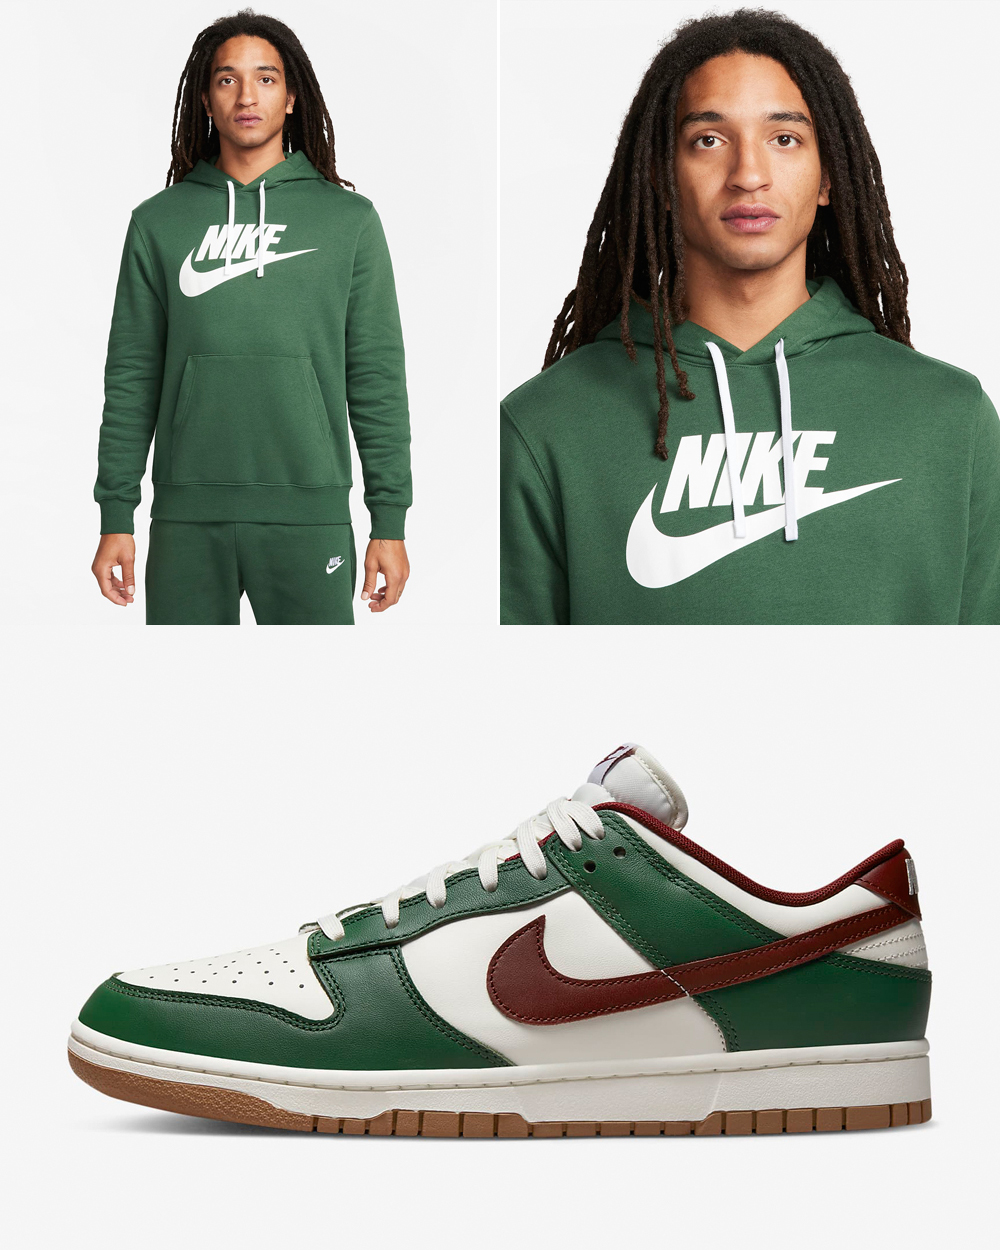 Nike-Dunk-Low-Gorge-Green-Hoodie-Outfit-1